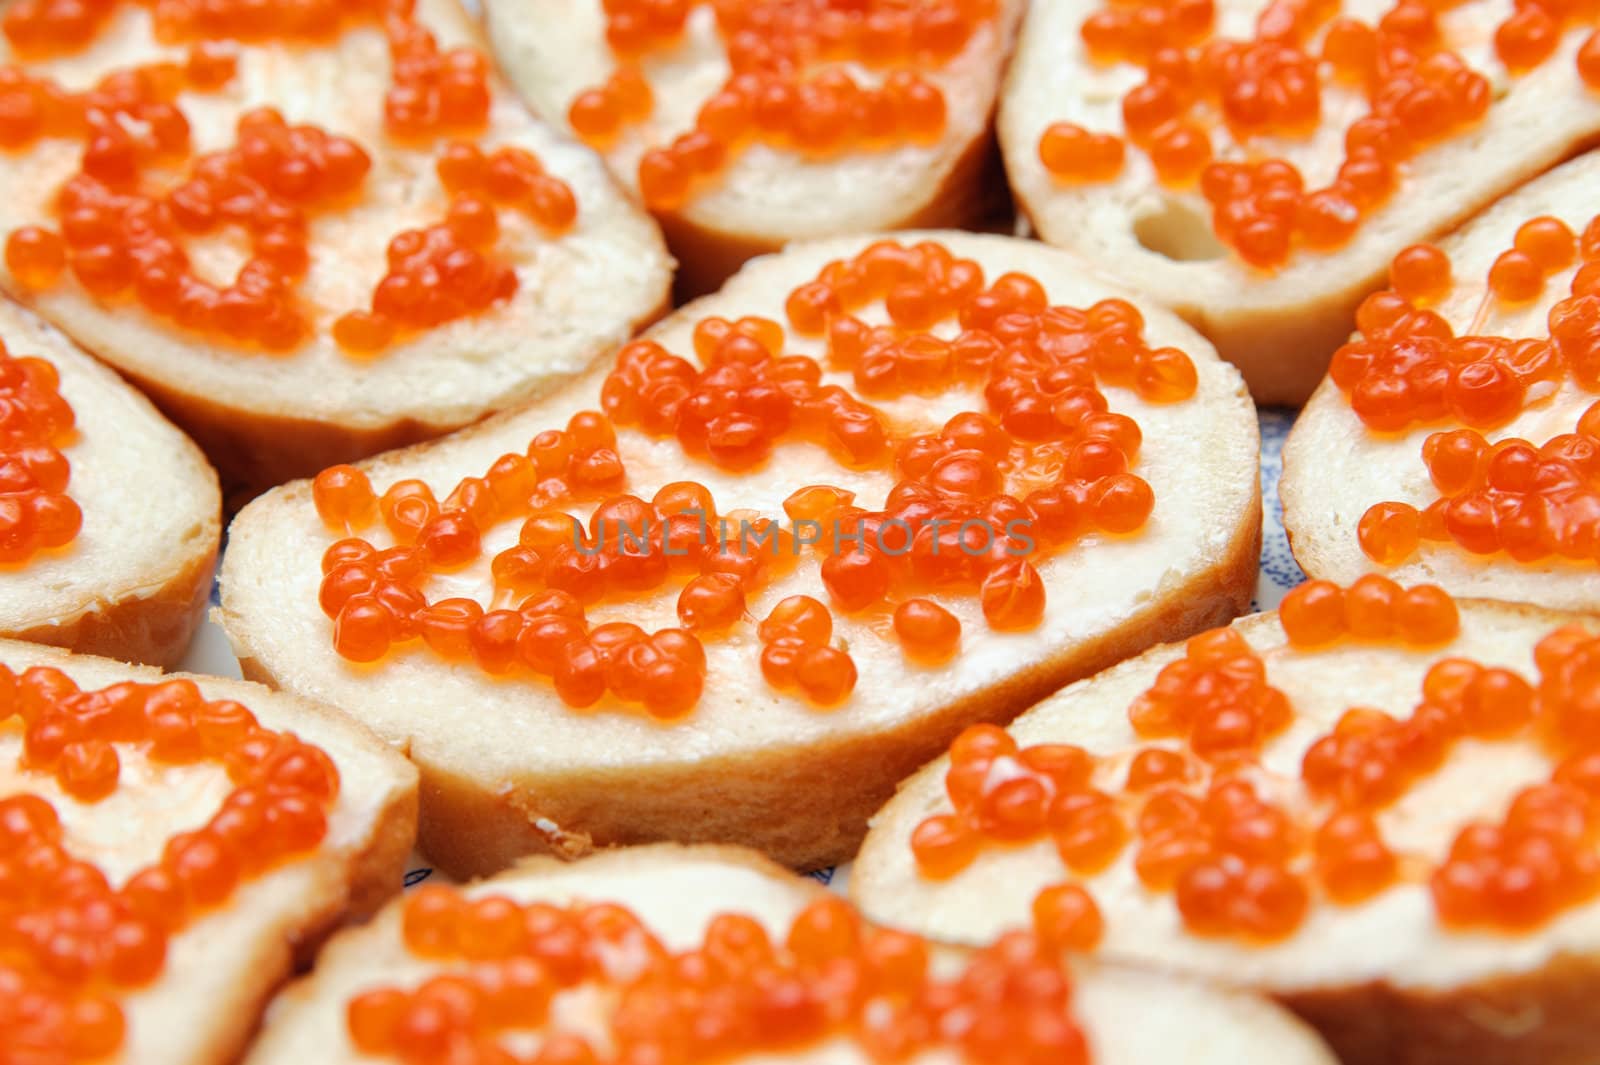 bread and butter with red caviar. Gourmet food